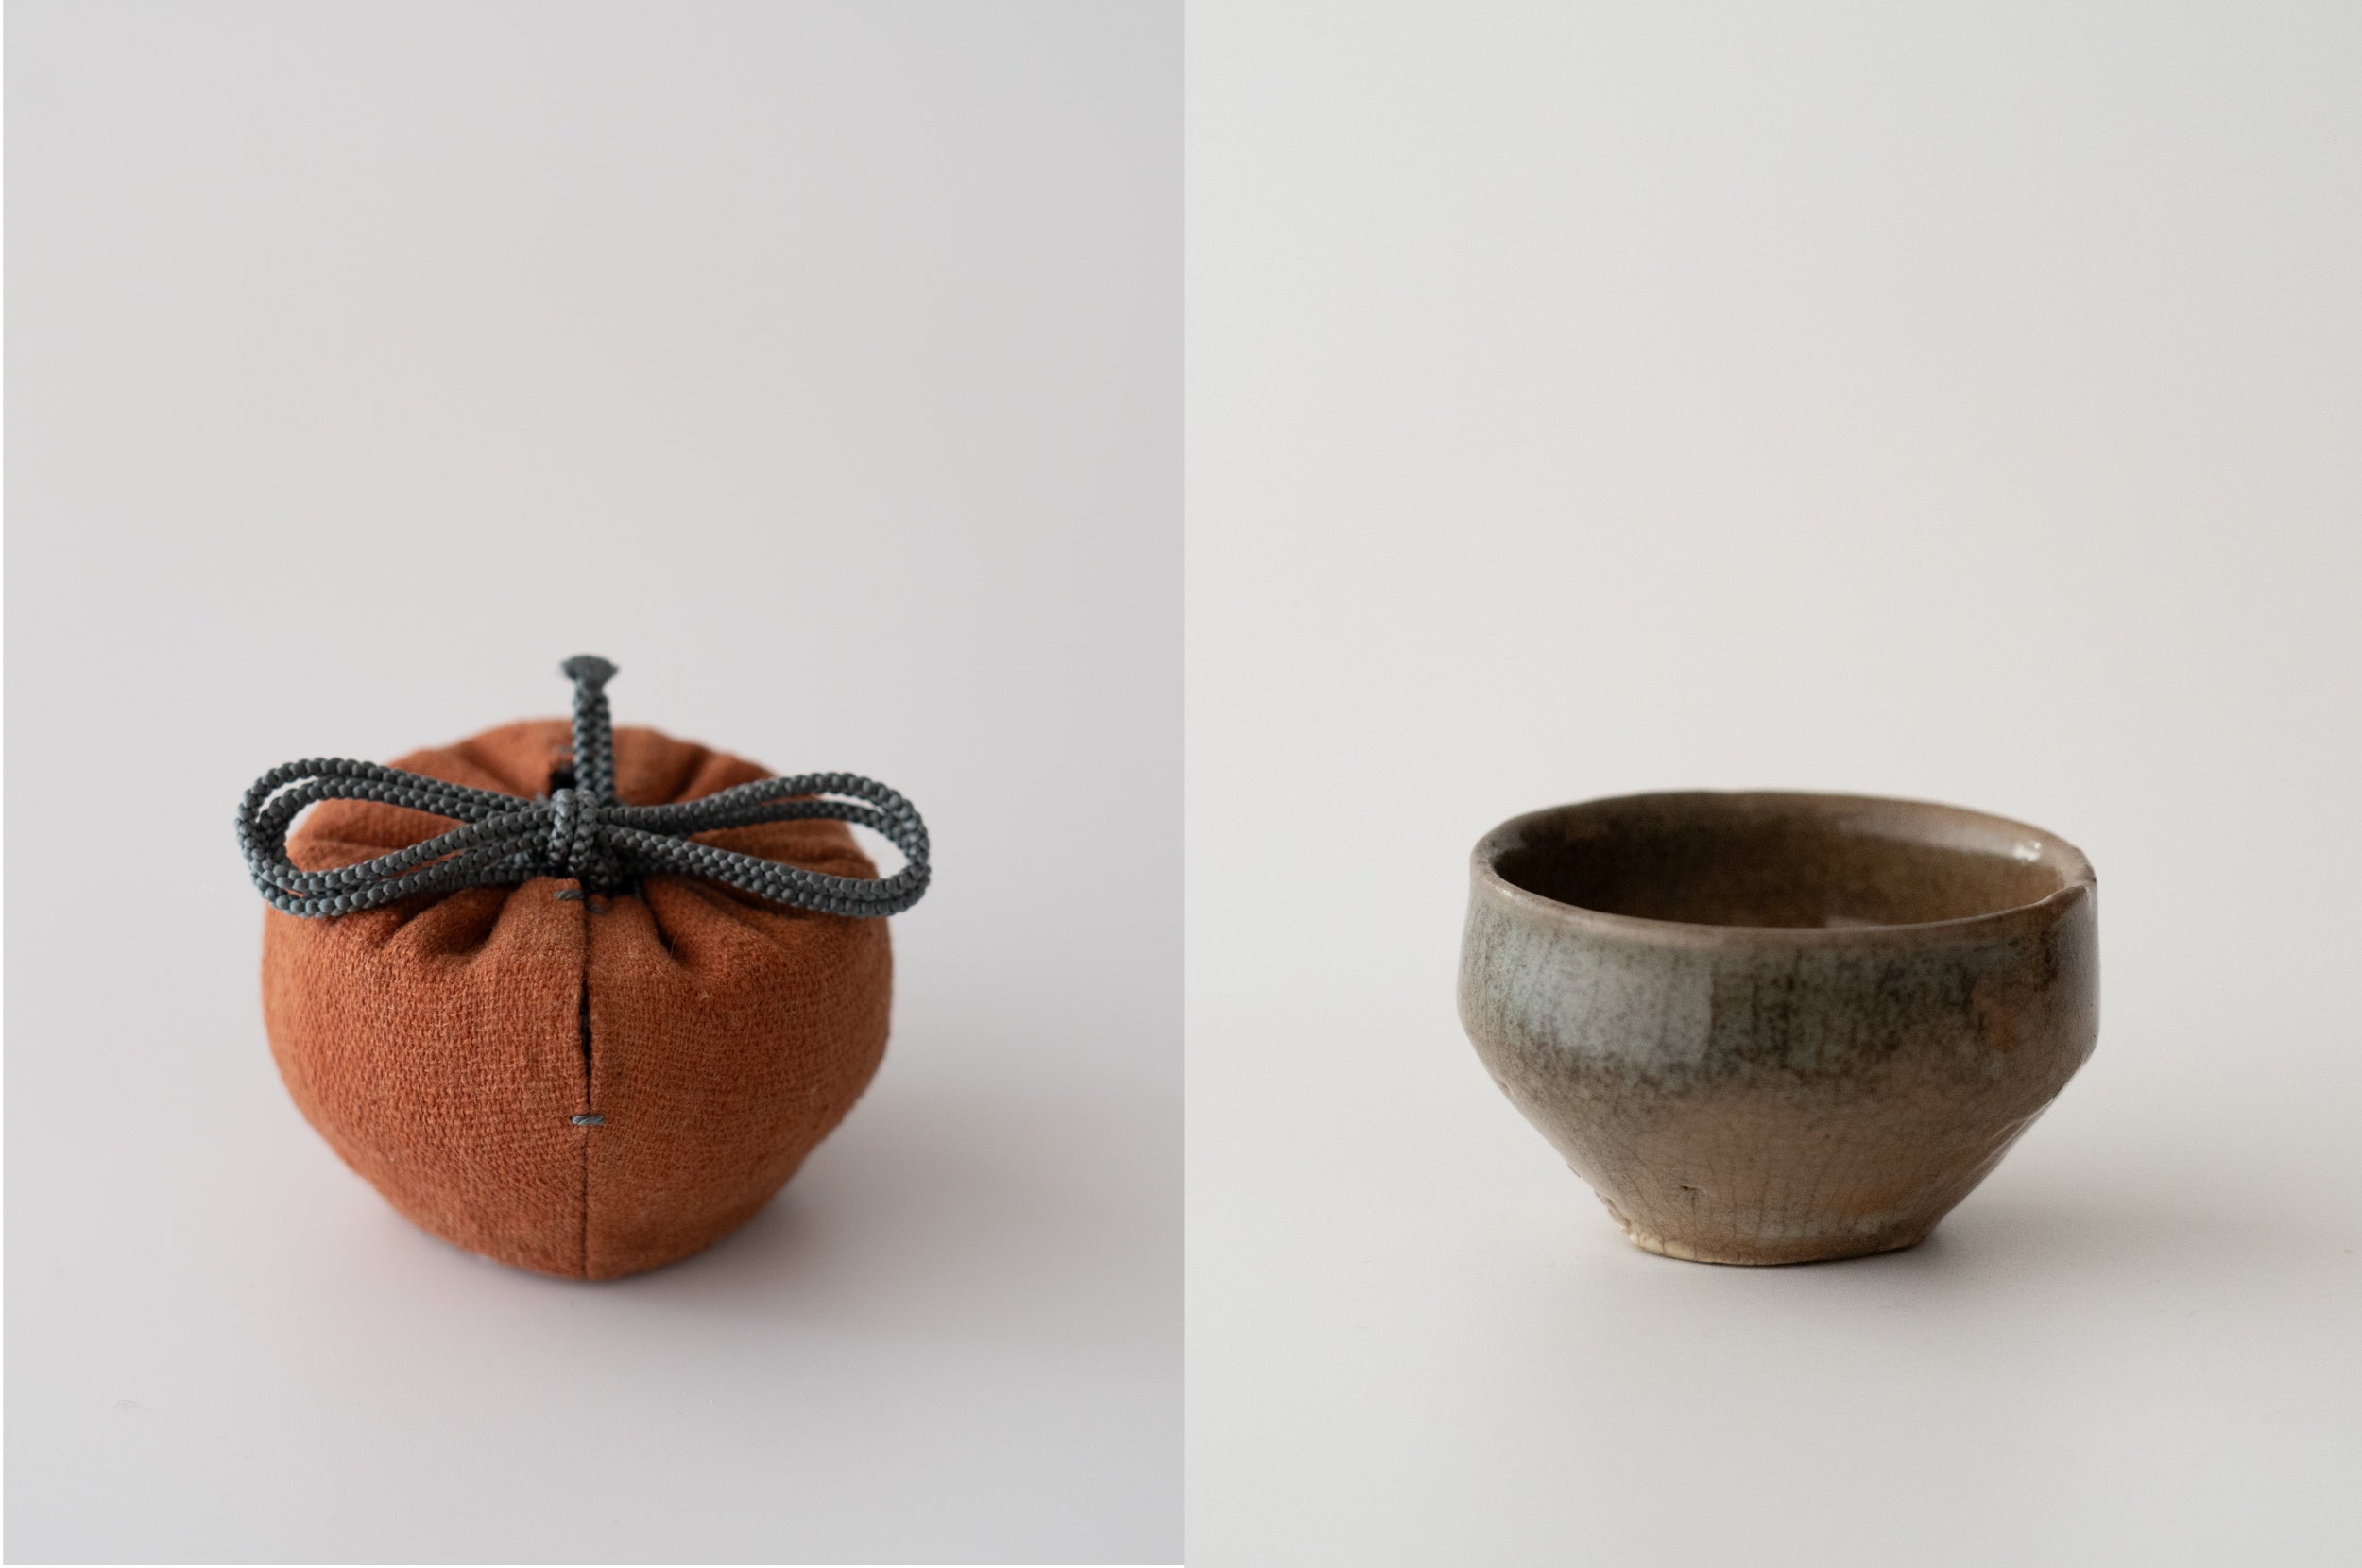 Sake cup in "Katate" style